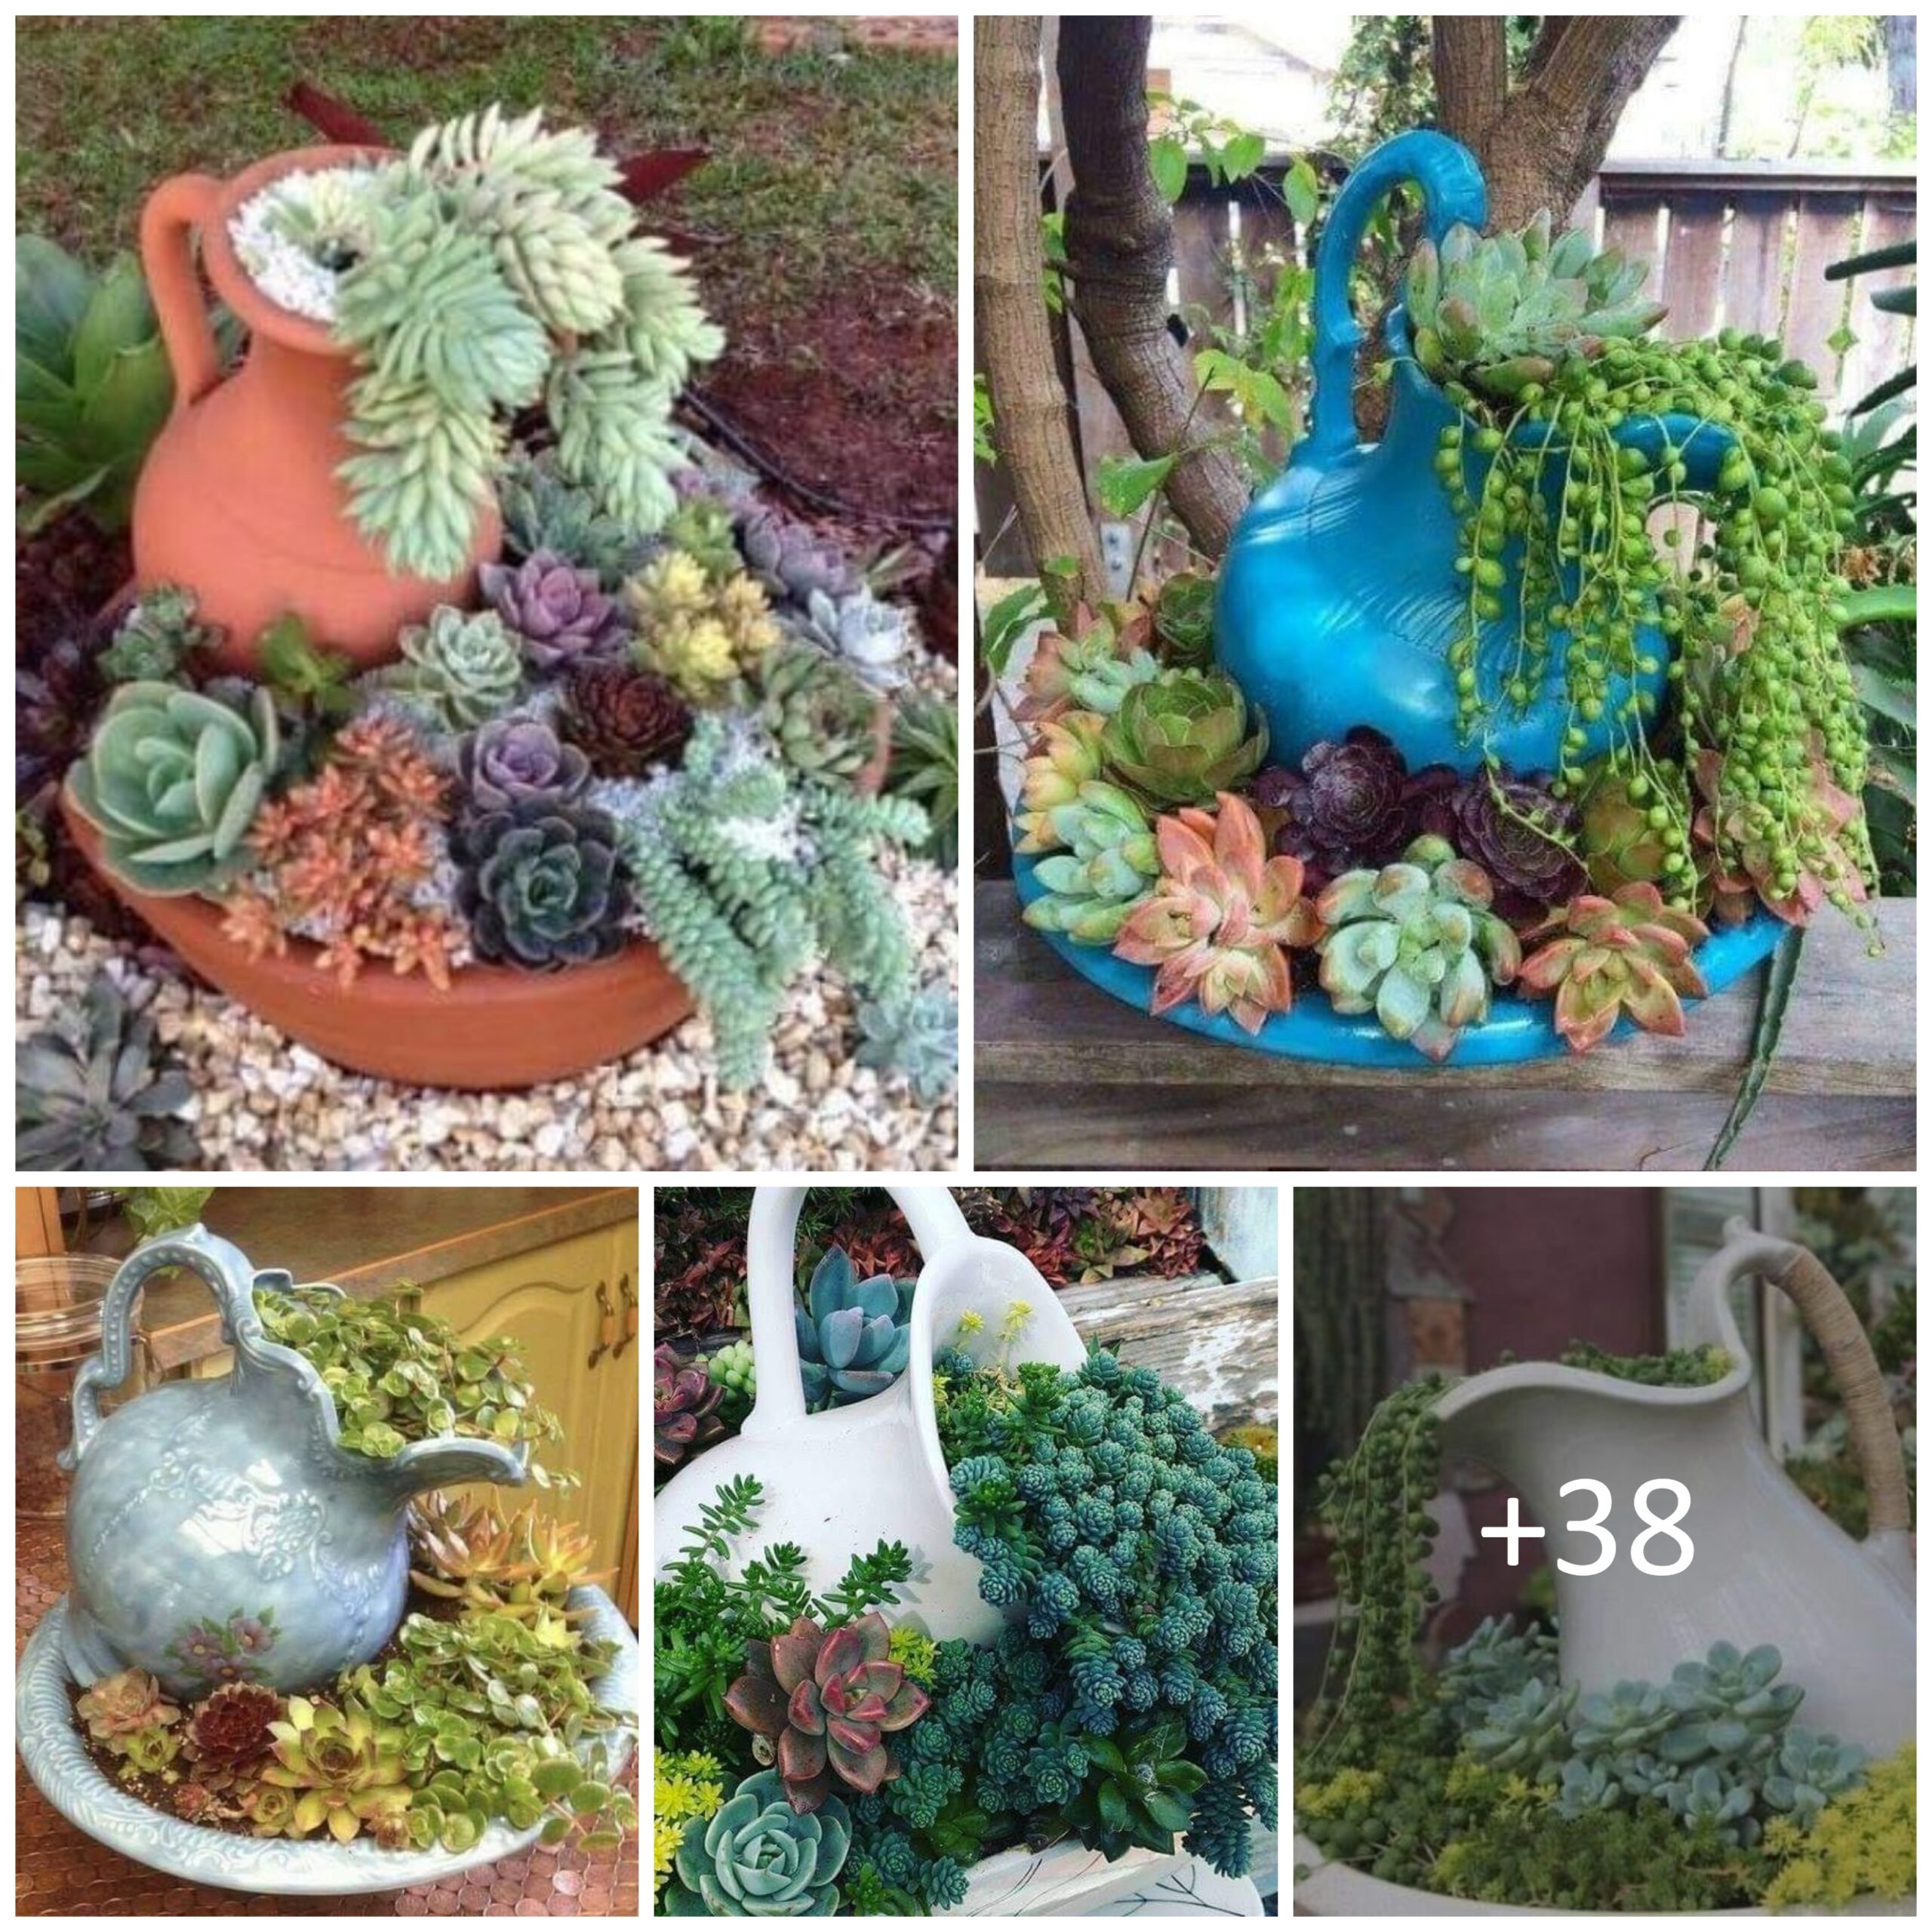 DIY Ideas for outdoor decorations with old teapots or jugs